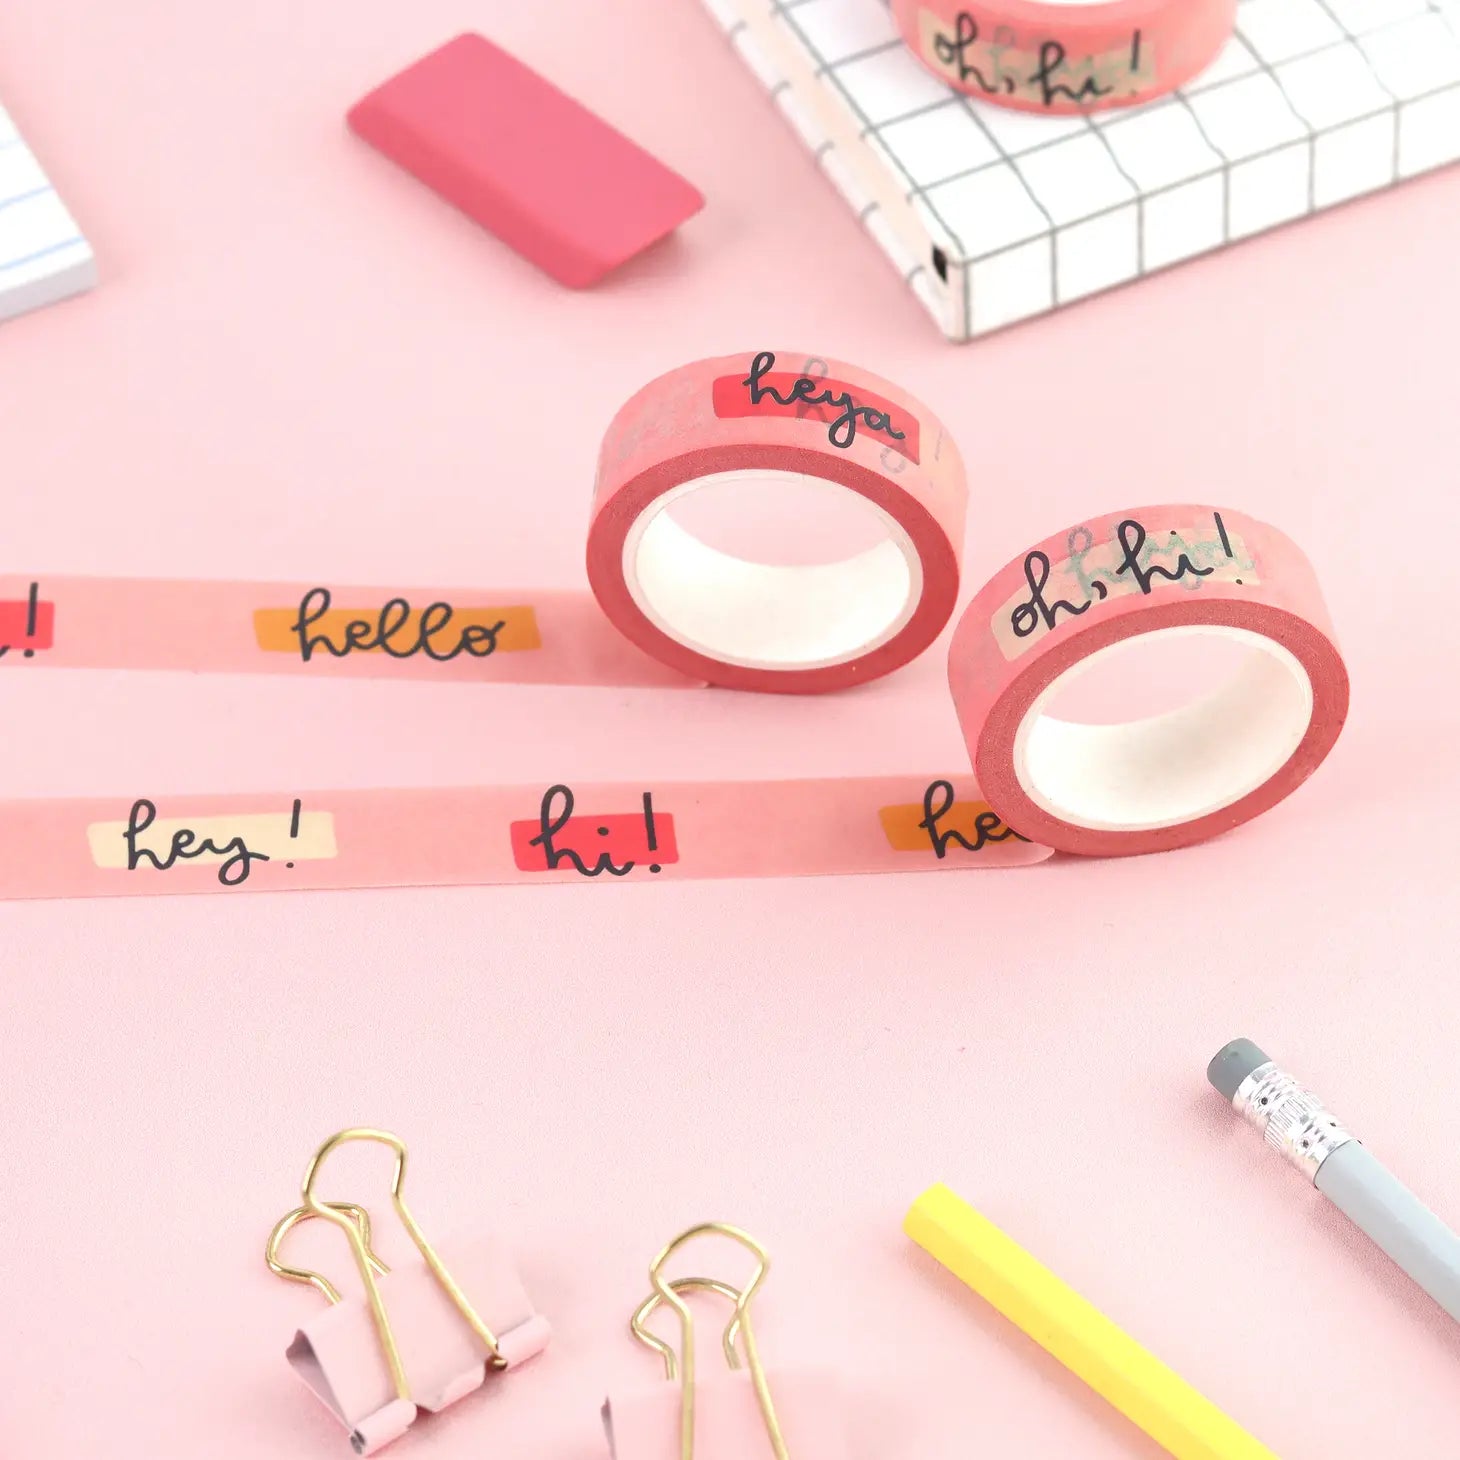 Pink hello washi tape, surrounded by other stationery items